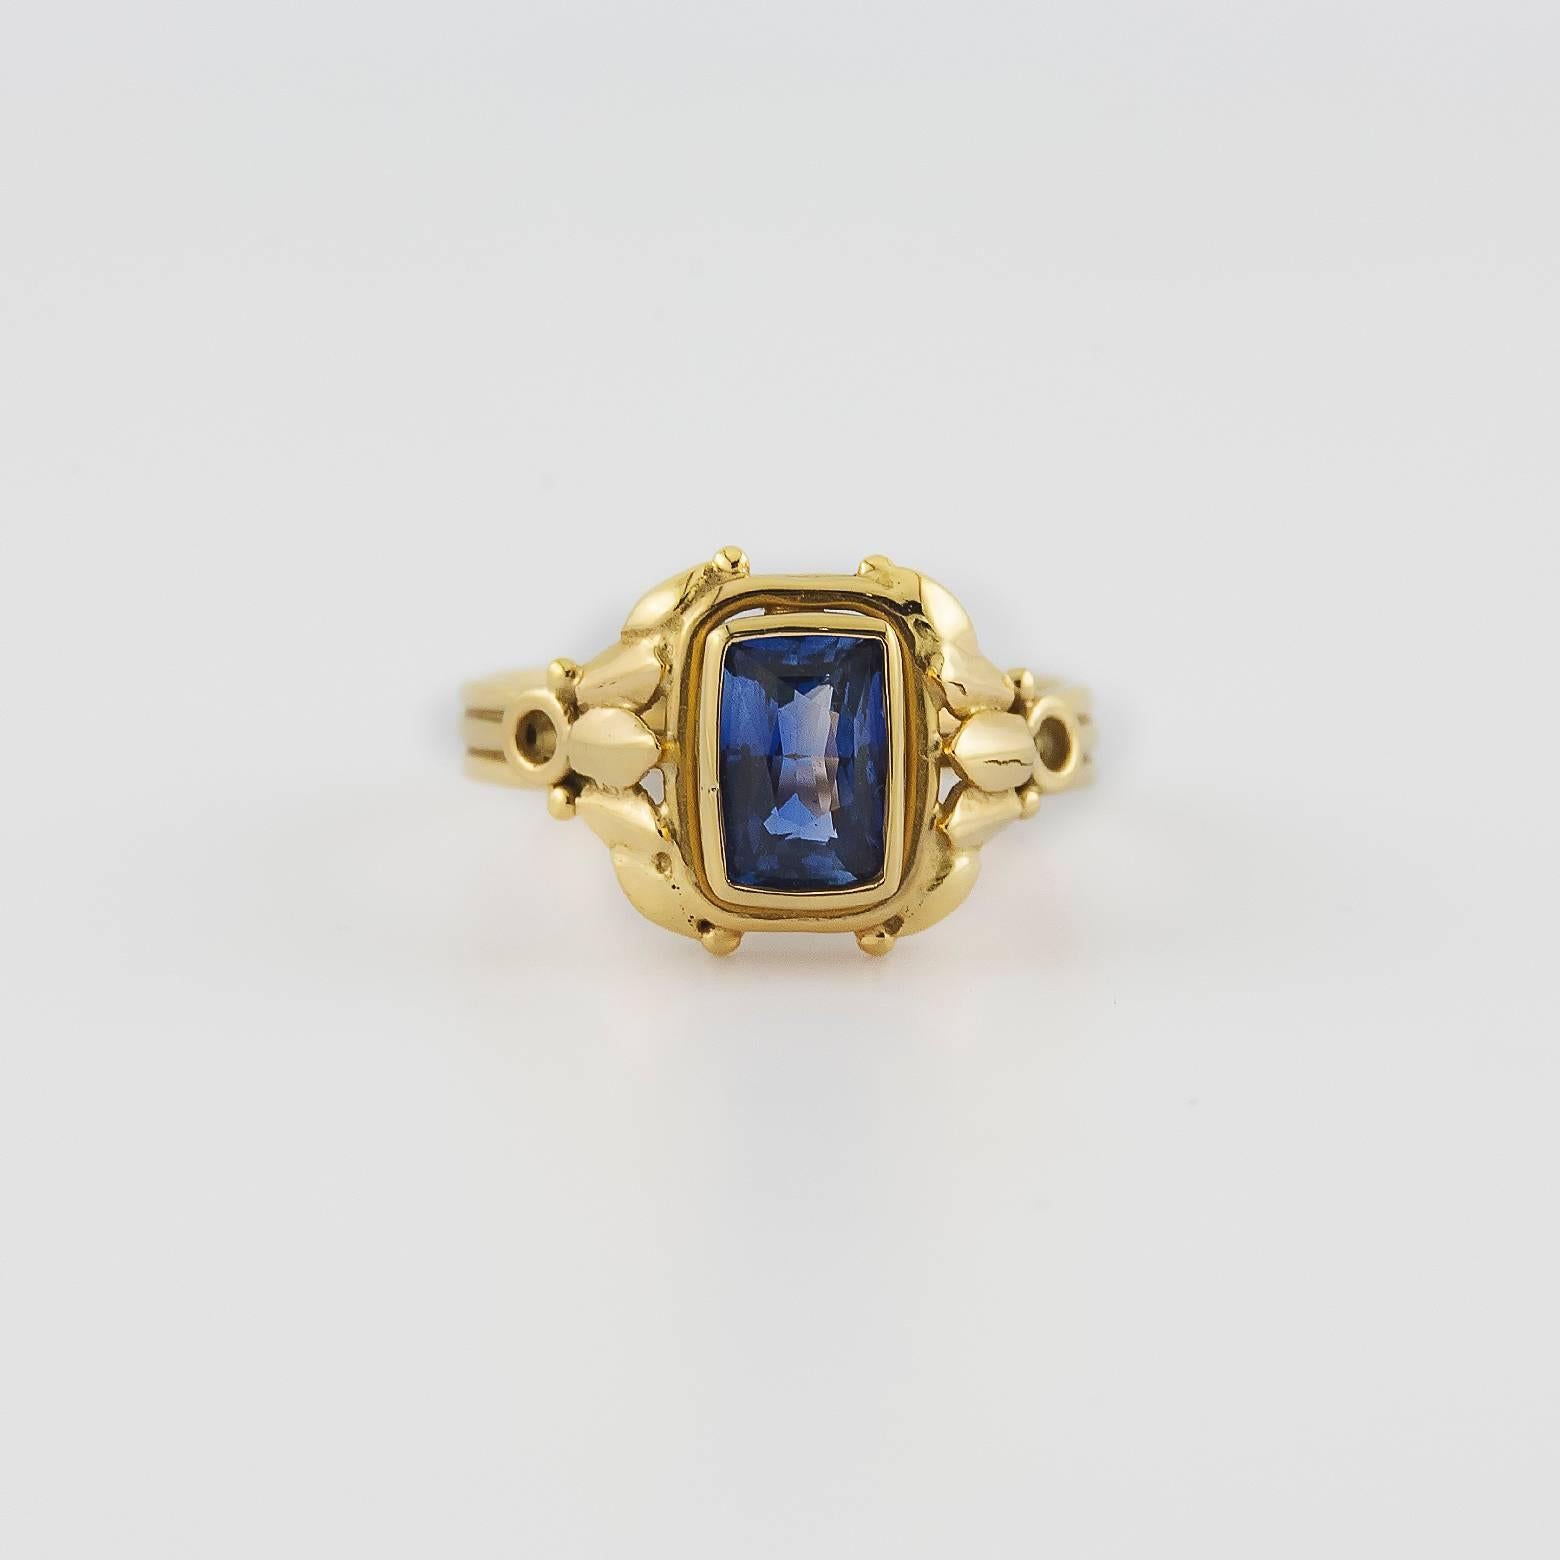 This piece looks Roman and elegant as if it were worn by a Queen! The brightness of the blue is deep and hypnotizing against 18K yellow gold and together they glow like the Mediterranean Sea. Approximately 2 carats of Sapphire, size 6.75